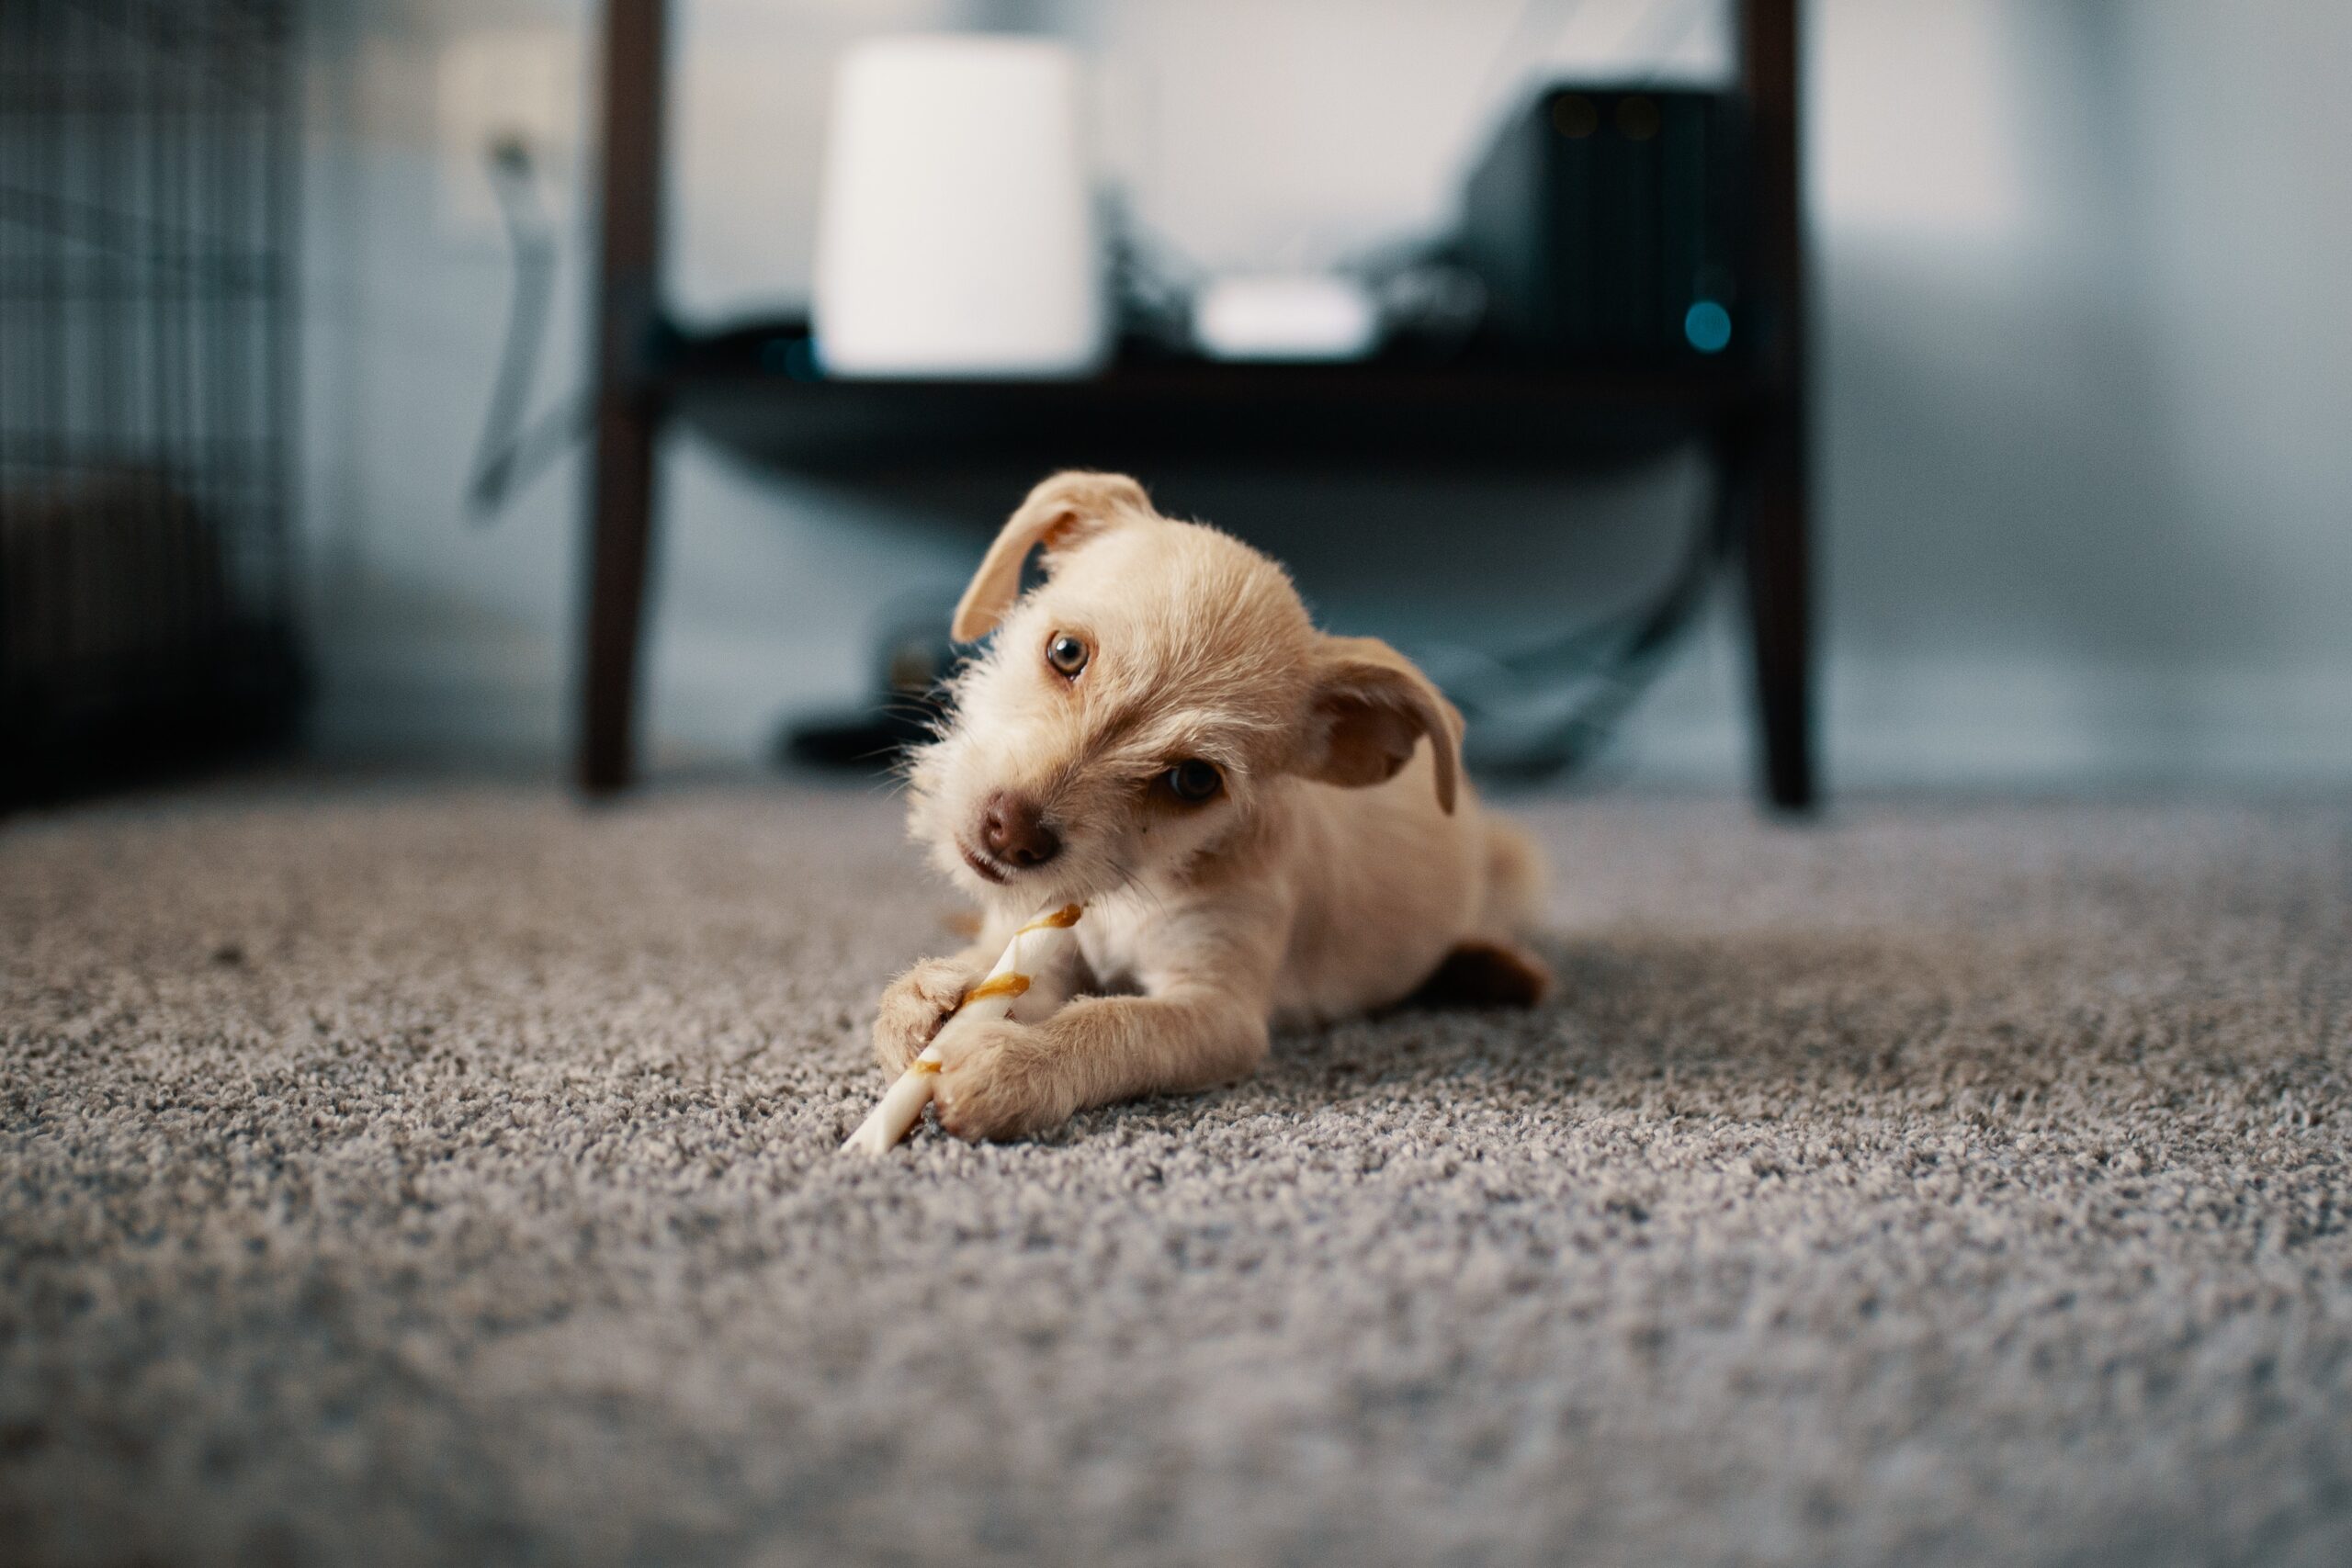 cute dog sitting on a carpeted floor